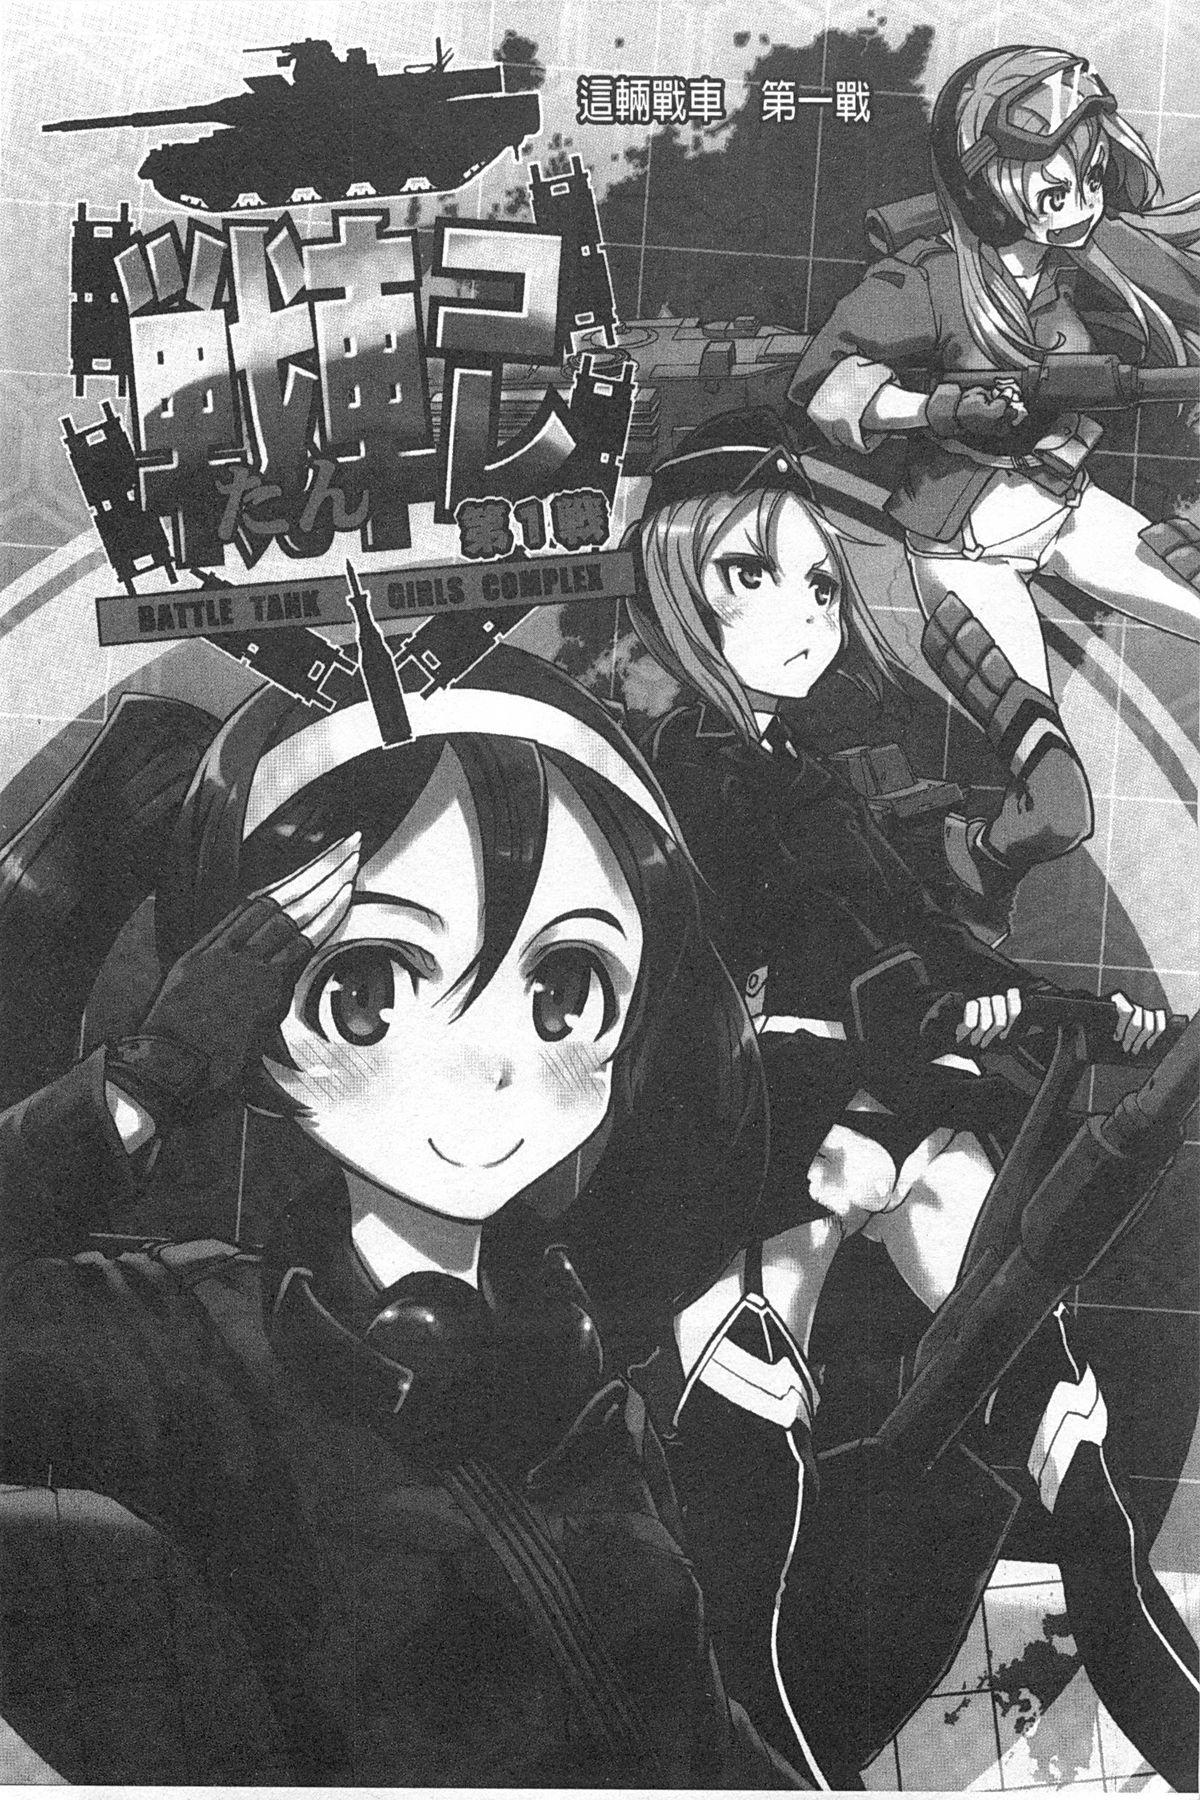 Orgia Tancolle - Battle Tank Girls Complex | TAN COLLE戰車收藏 Bokep - Page 6